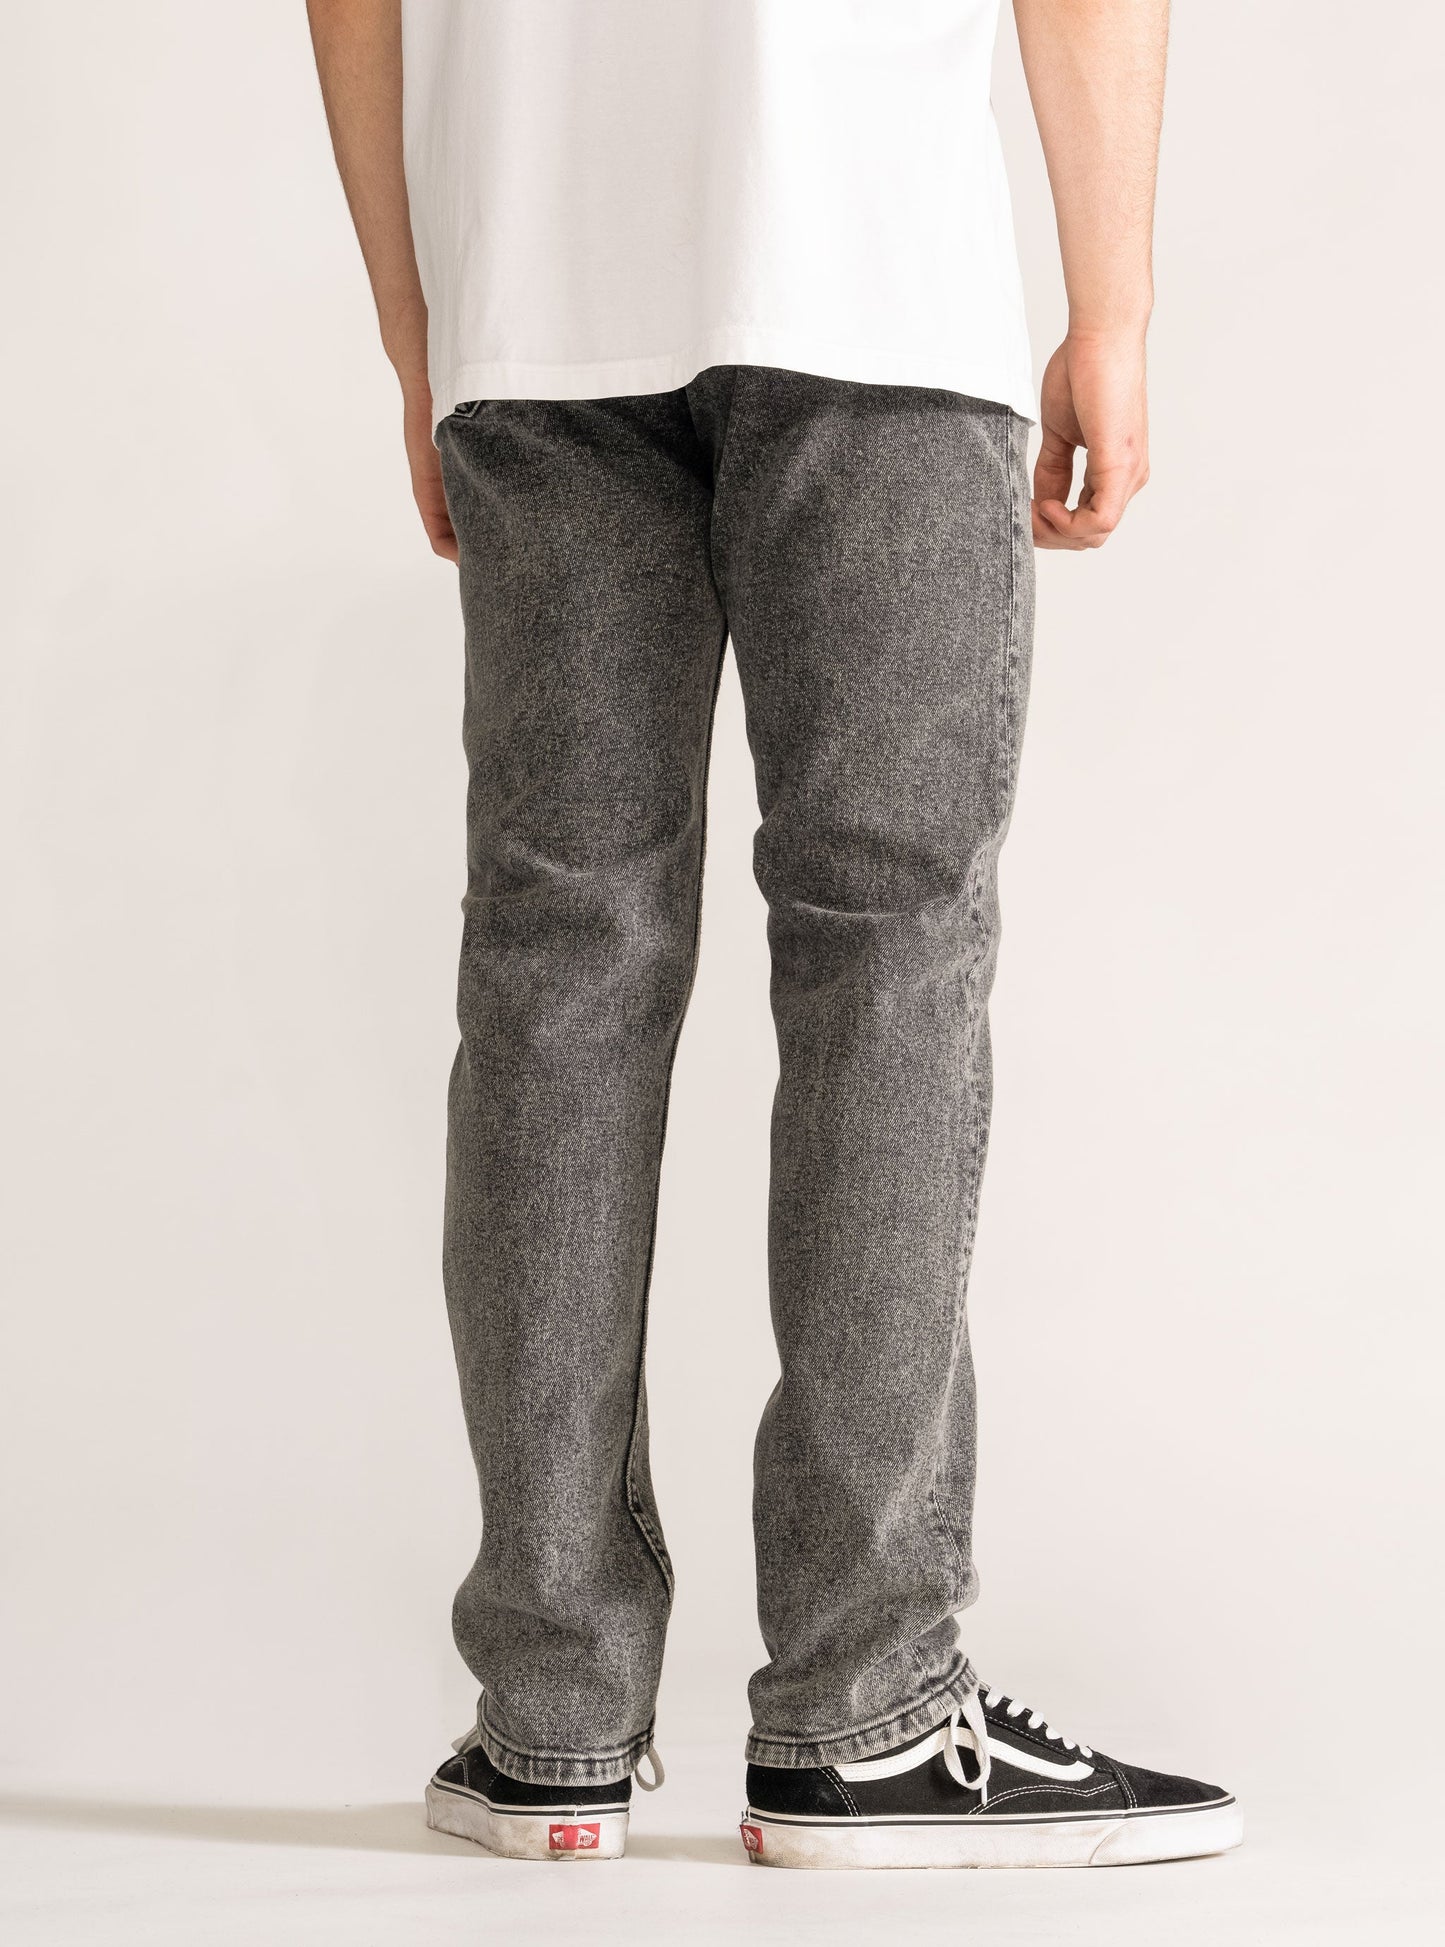 People Are Strange Jeans Slim Fit, Gris Obscuro